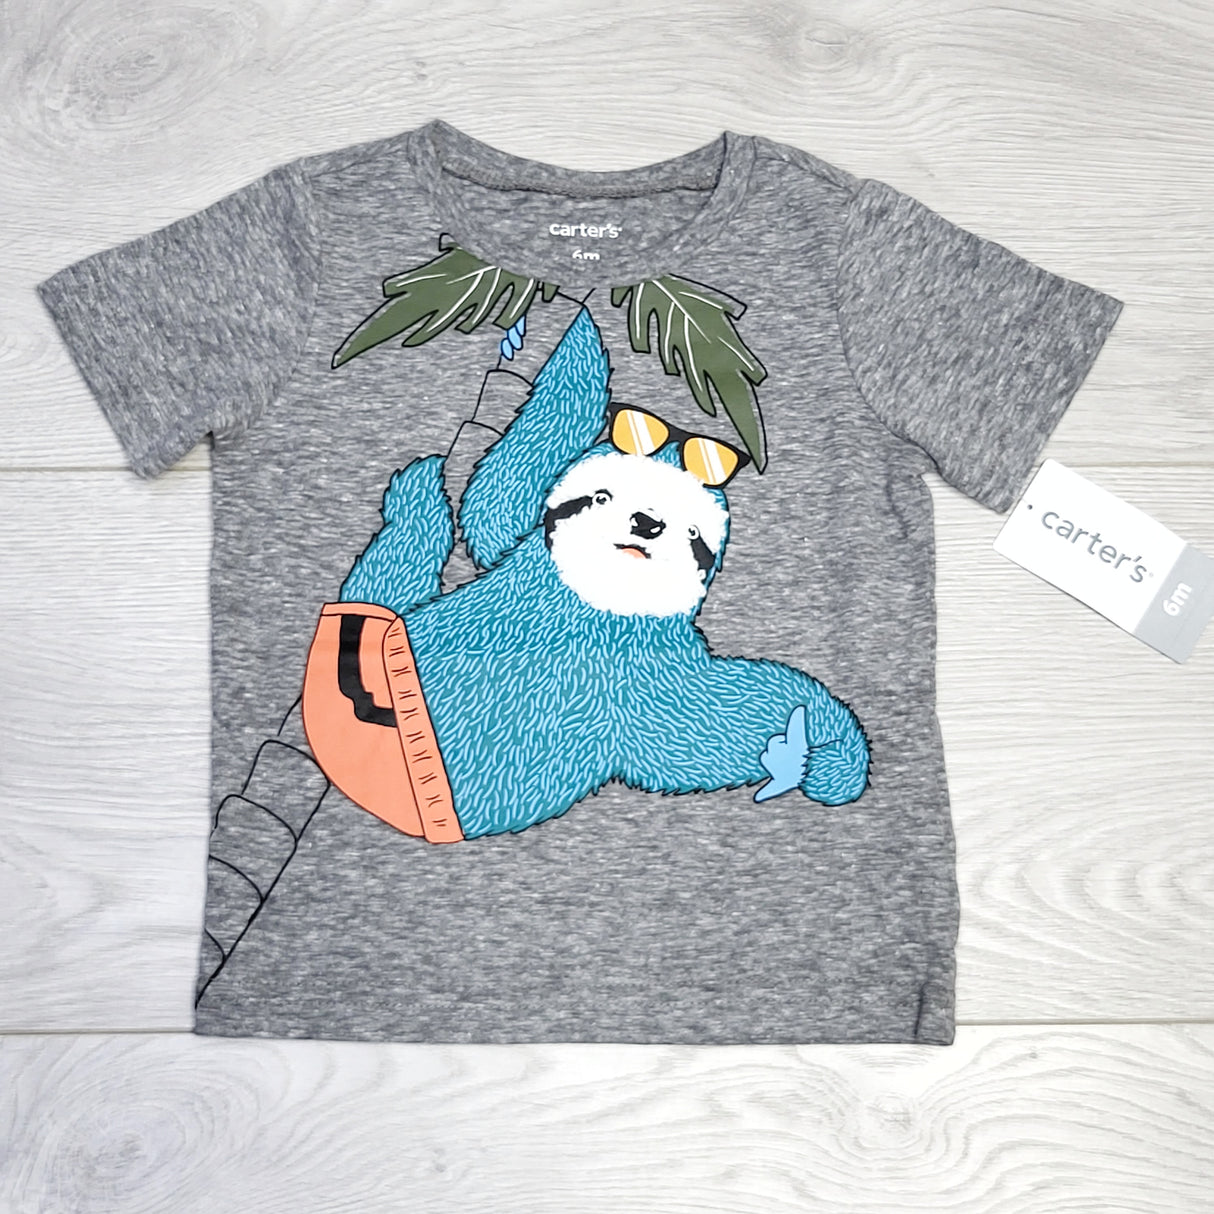 MSNDS11 - NEW - Carters grey t-shirt with sloth. Size 6 months